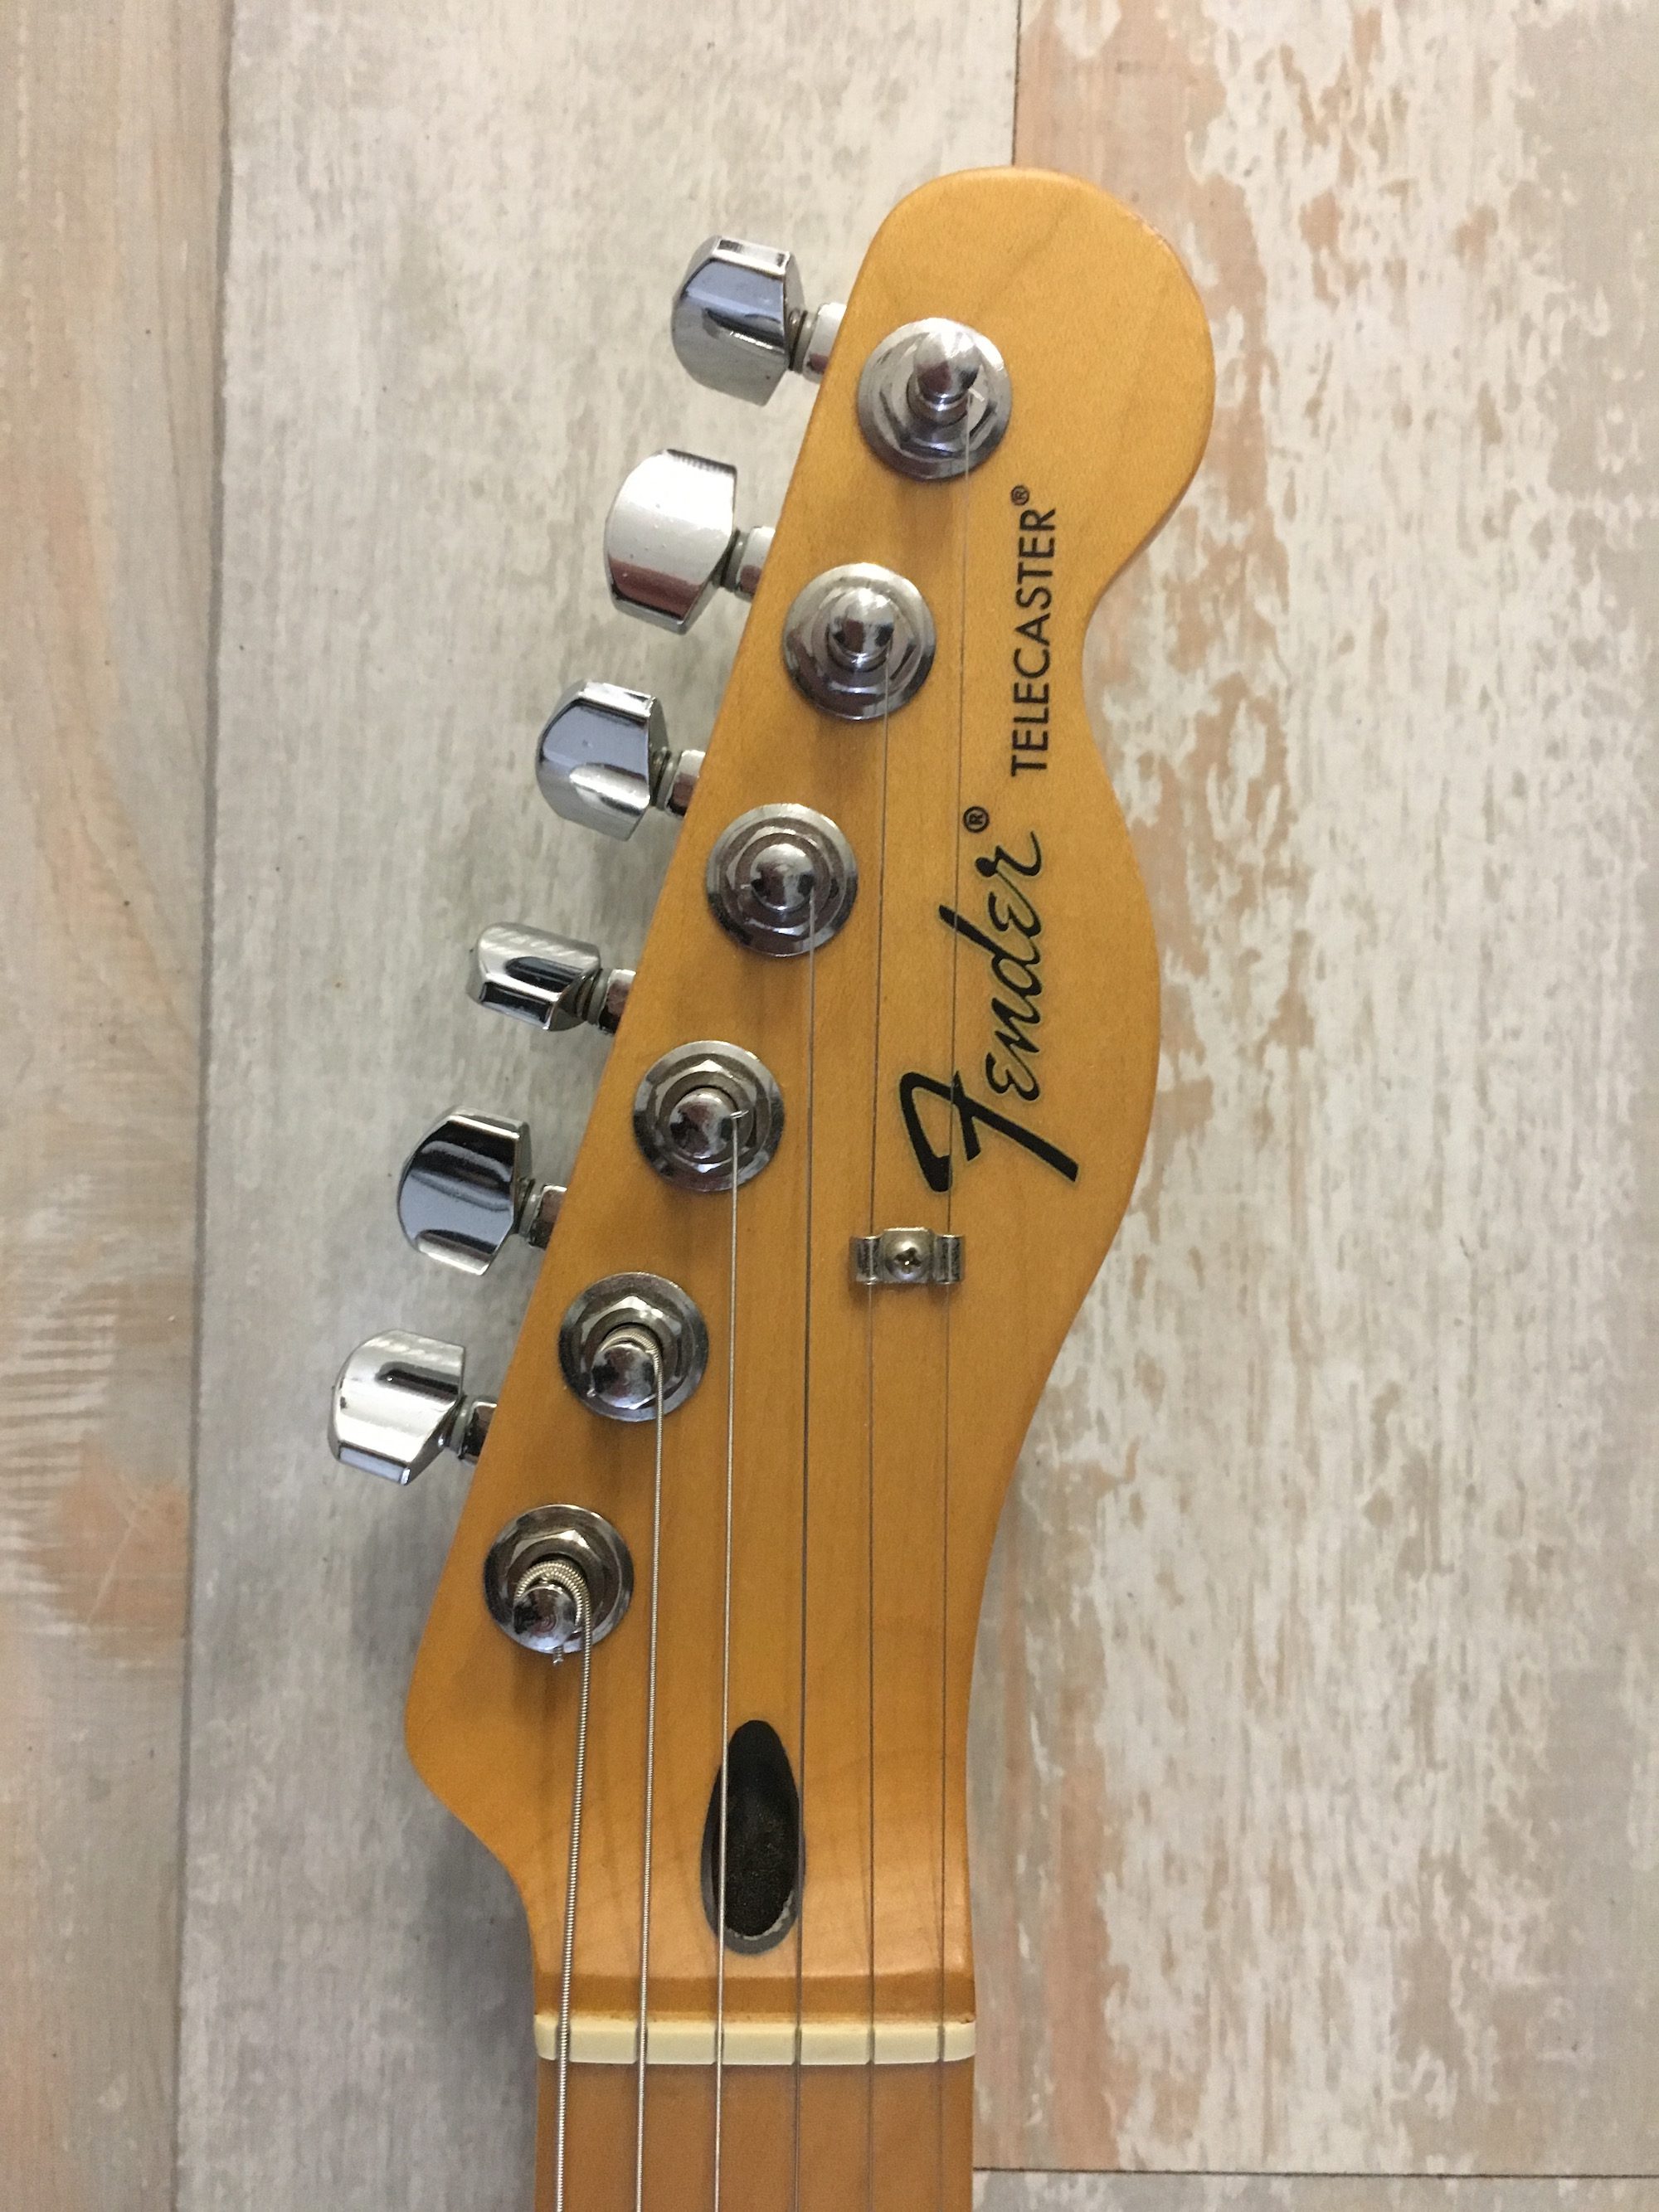 Used Fender Telecaster | Used Guitars in Rock Hill, SC